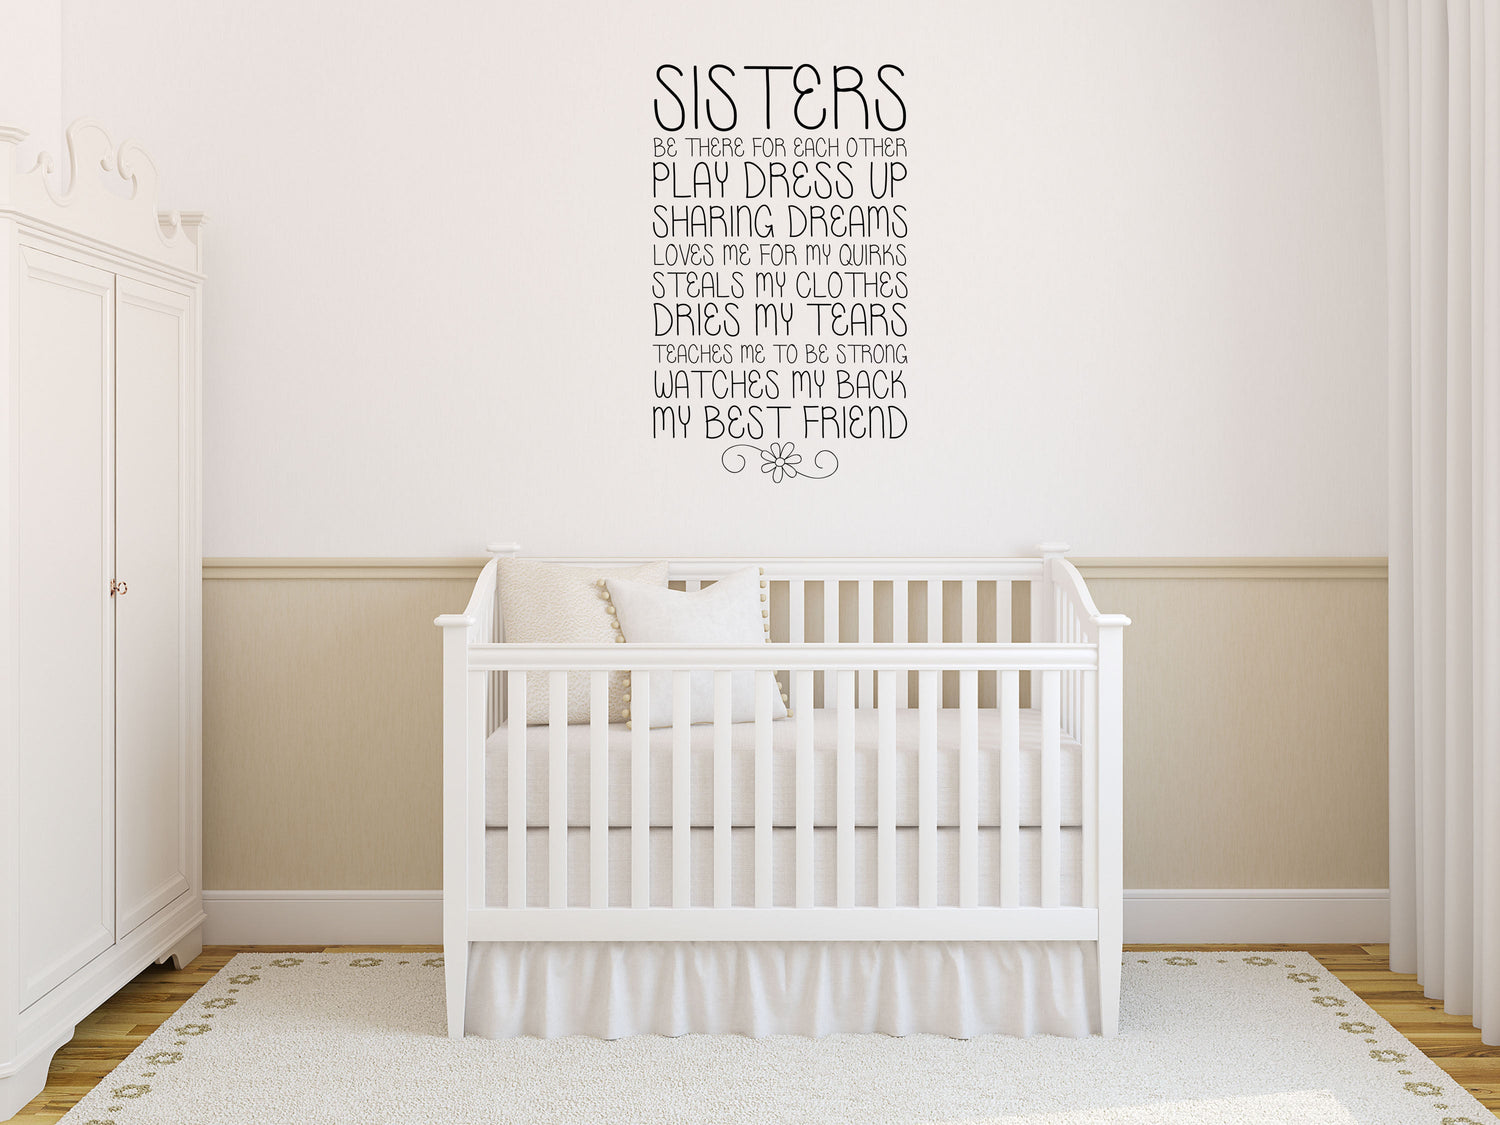 Sisters - Inspirational Wall Decals Vinyl Wall Decal Inspirational Wall Signs 